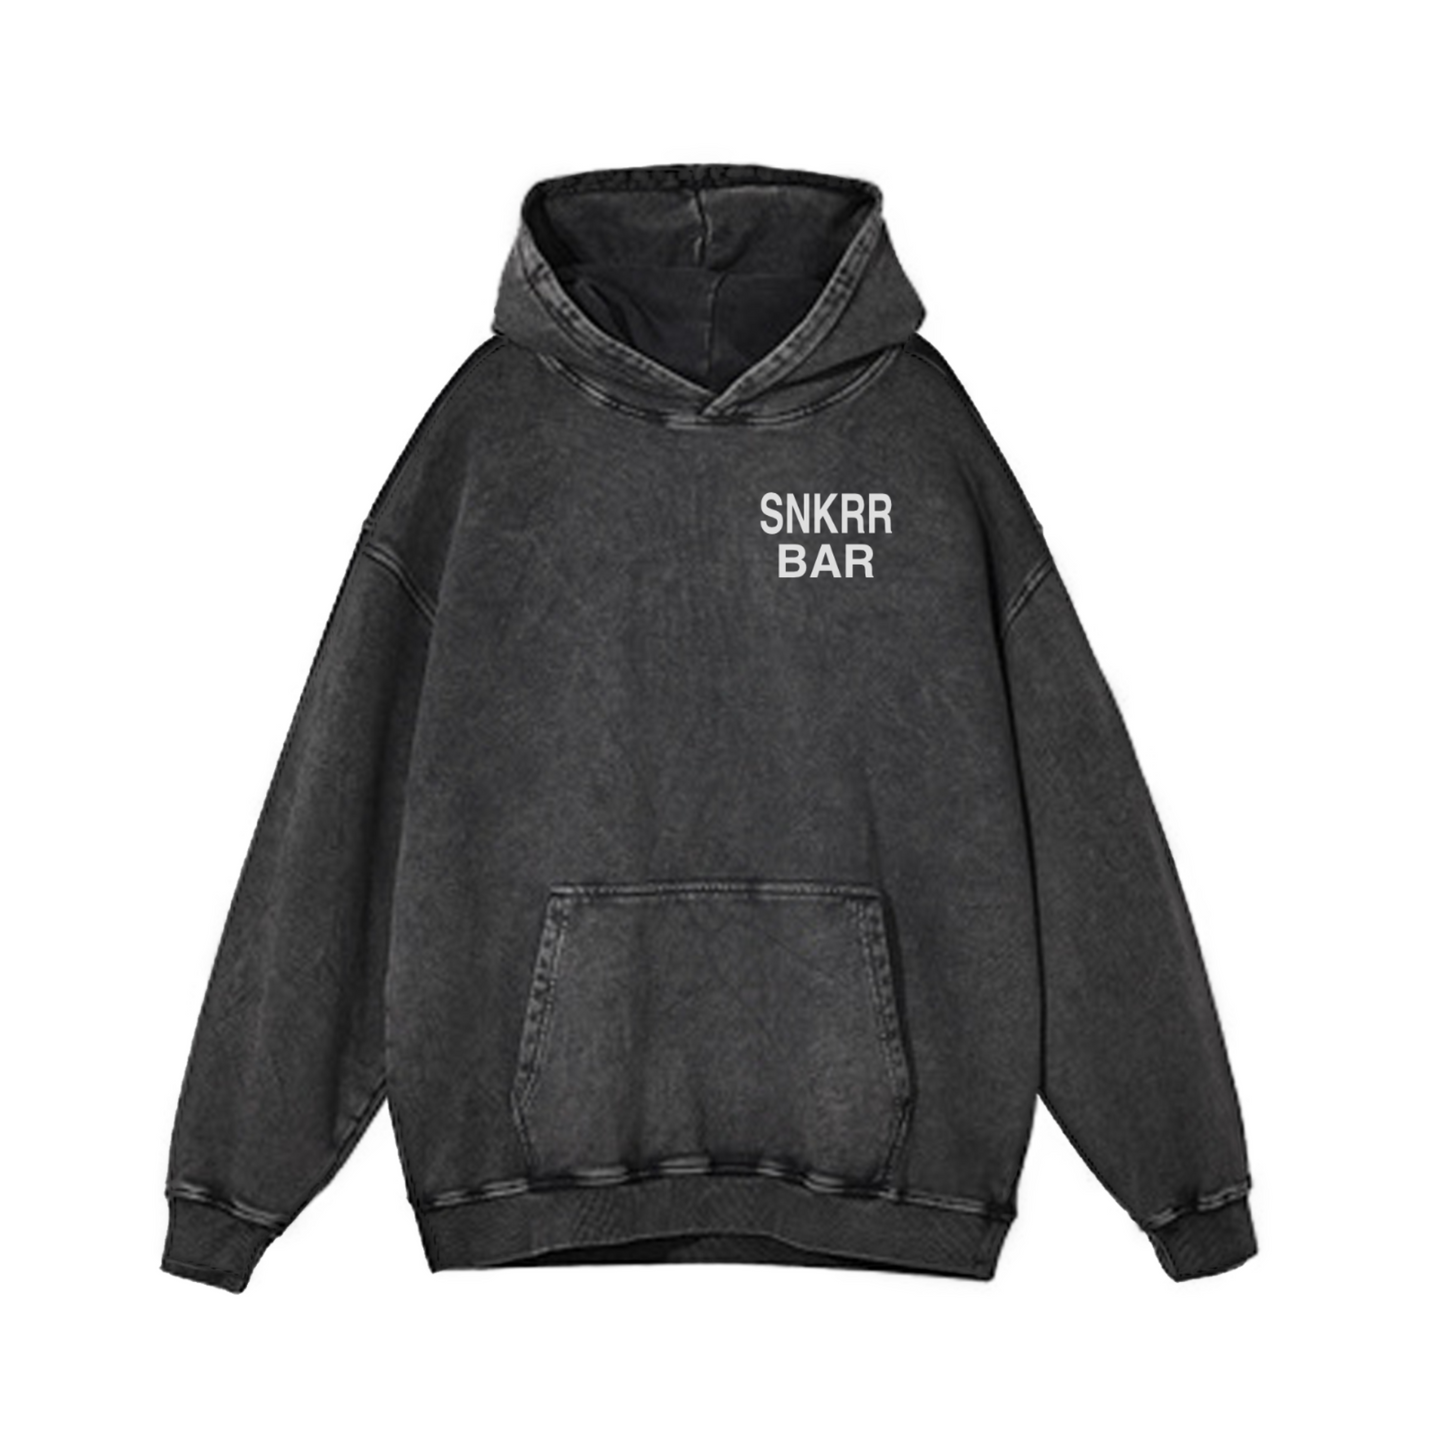 The SNKRR BAR Hoodie